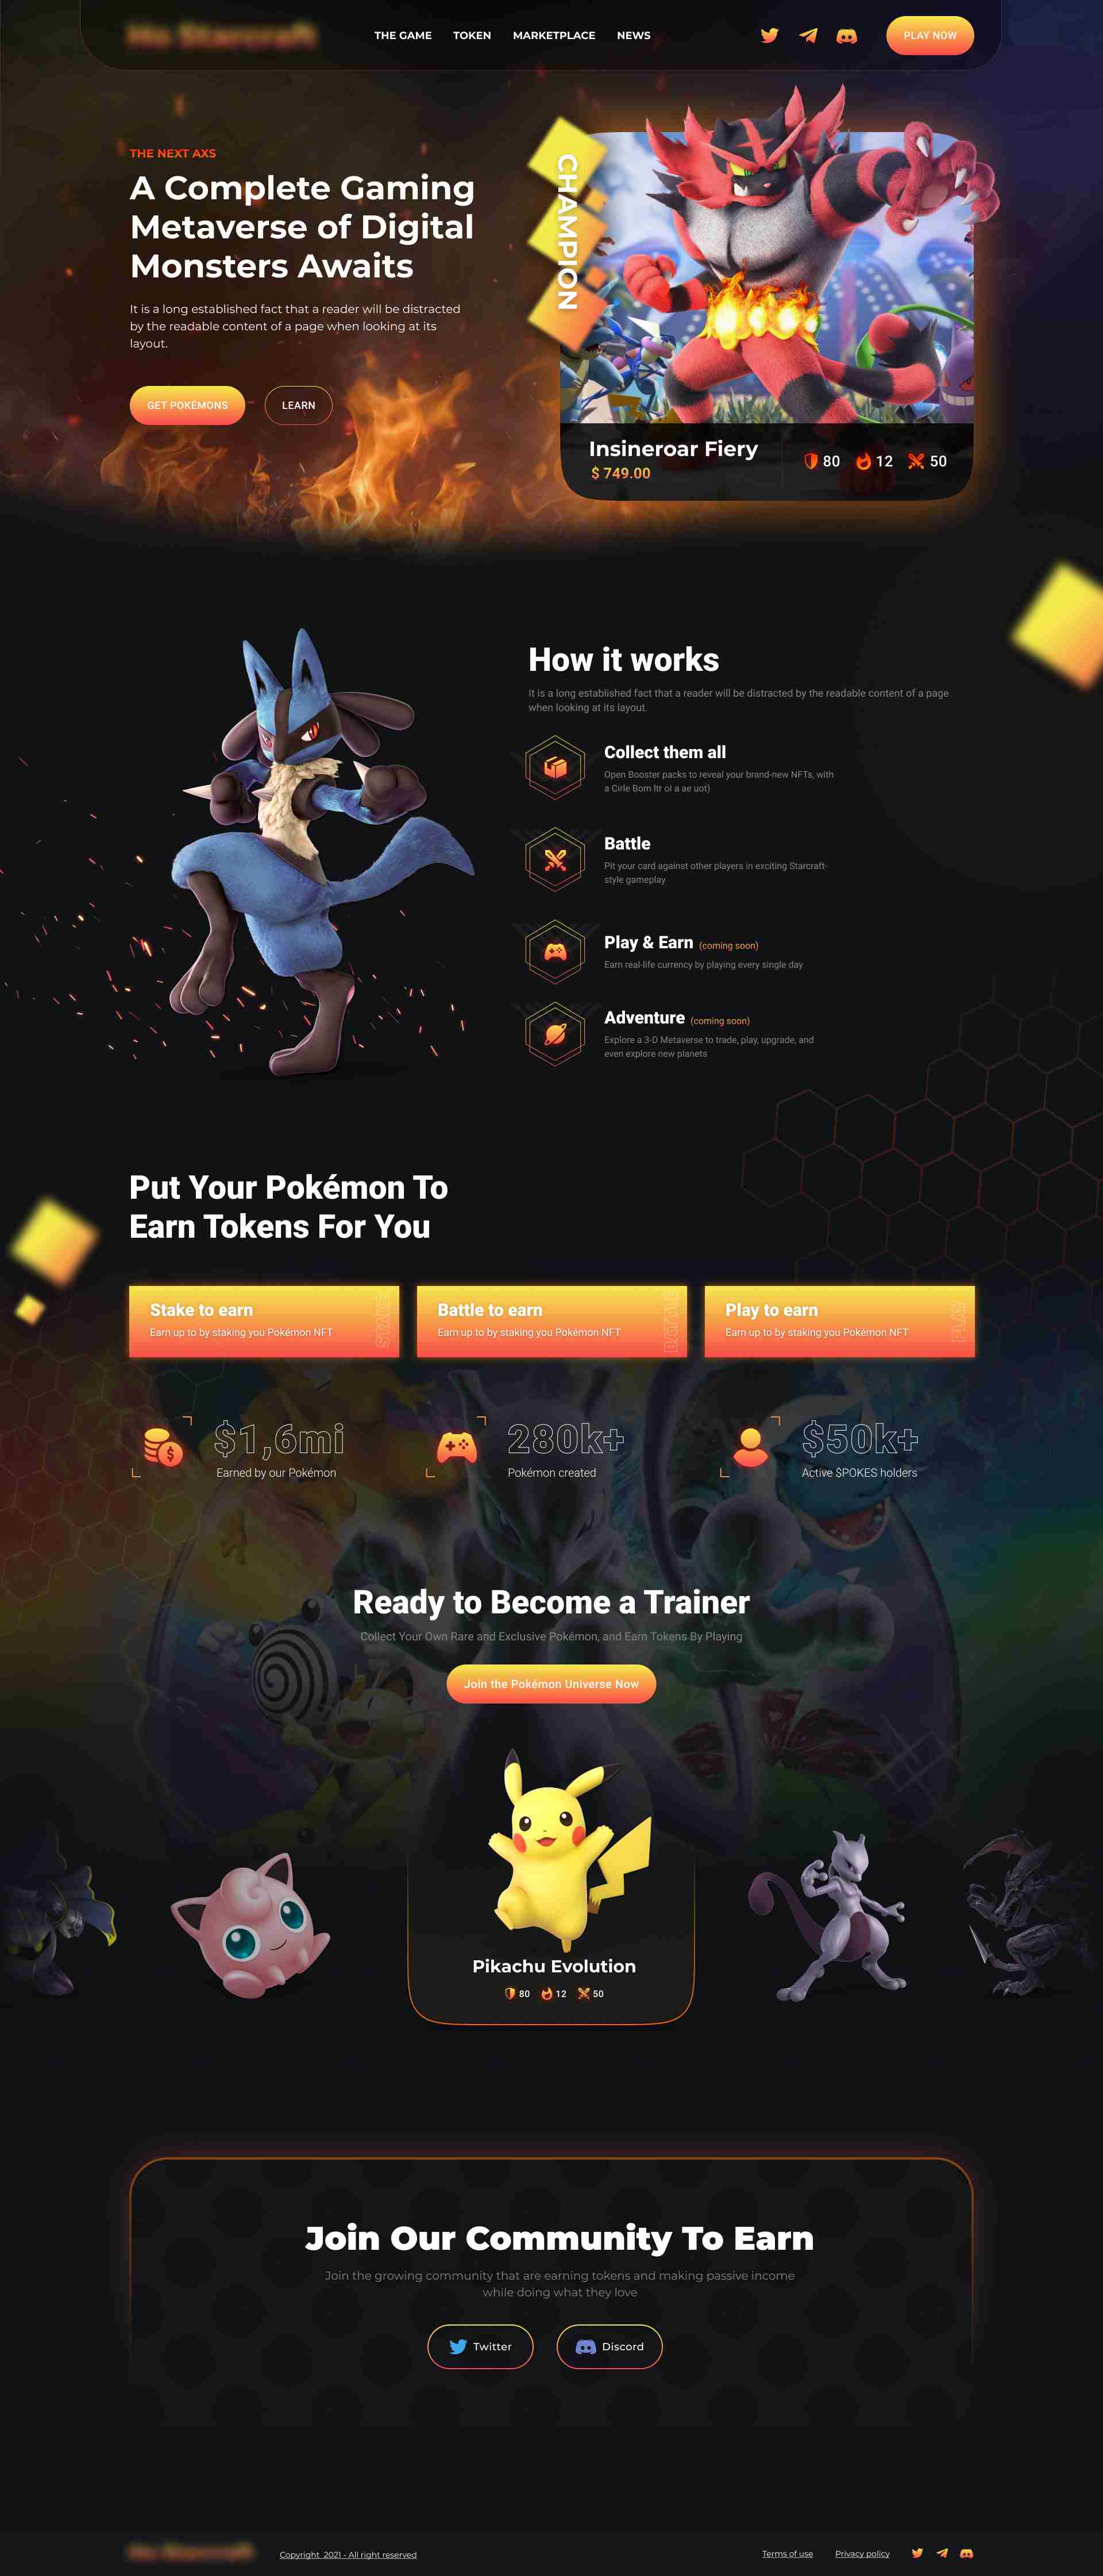 Play-to-earn NFT game (POKEMONS)